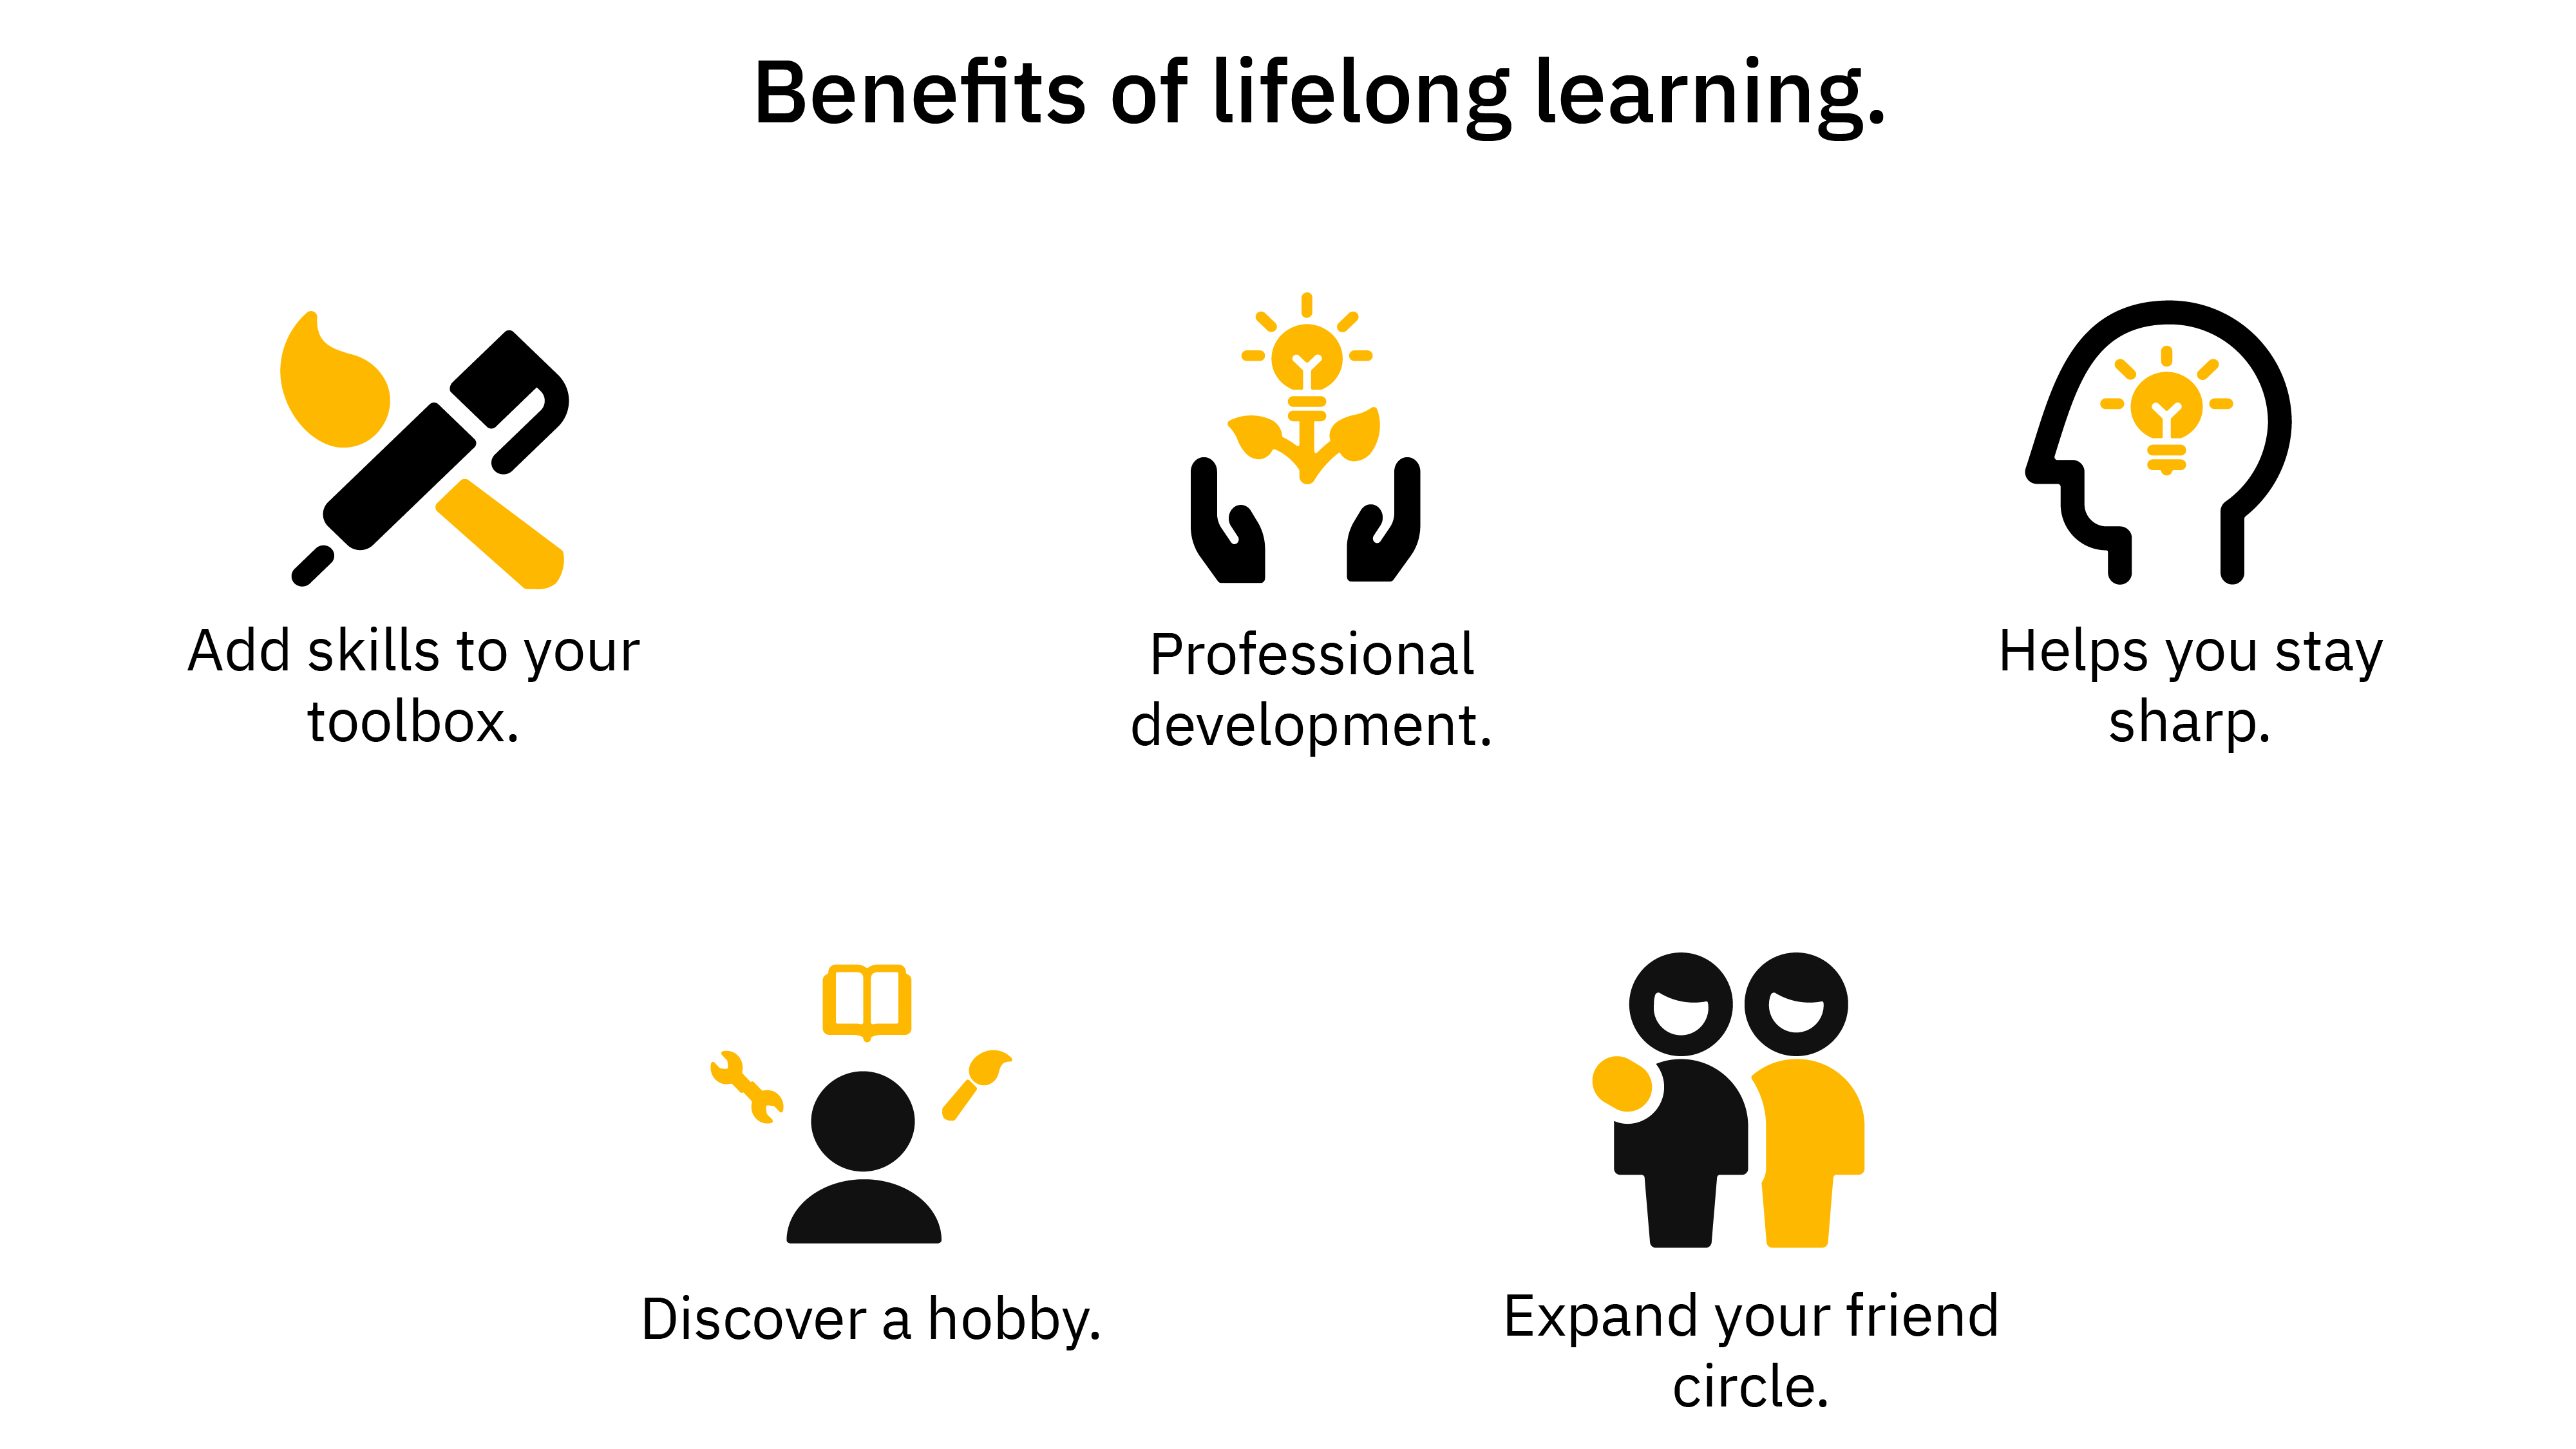 An infographic showing the benefits of lifelong learning